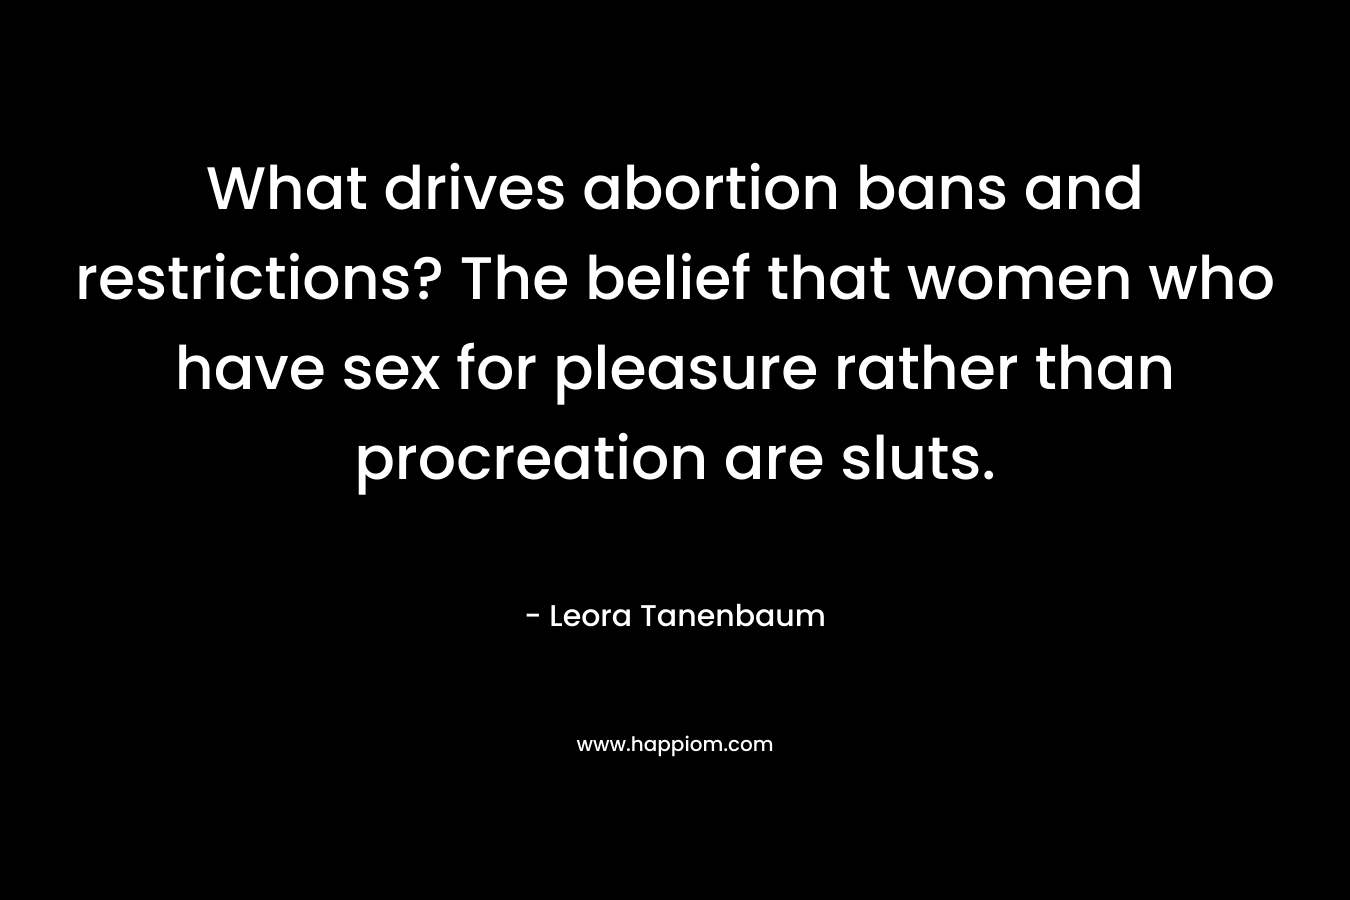 What drives abortion bans and restrictions? The belief that women who have sex for pleasure rather than procreation are sluts. – Leora Tanenbaum